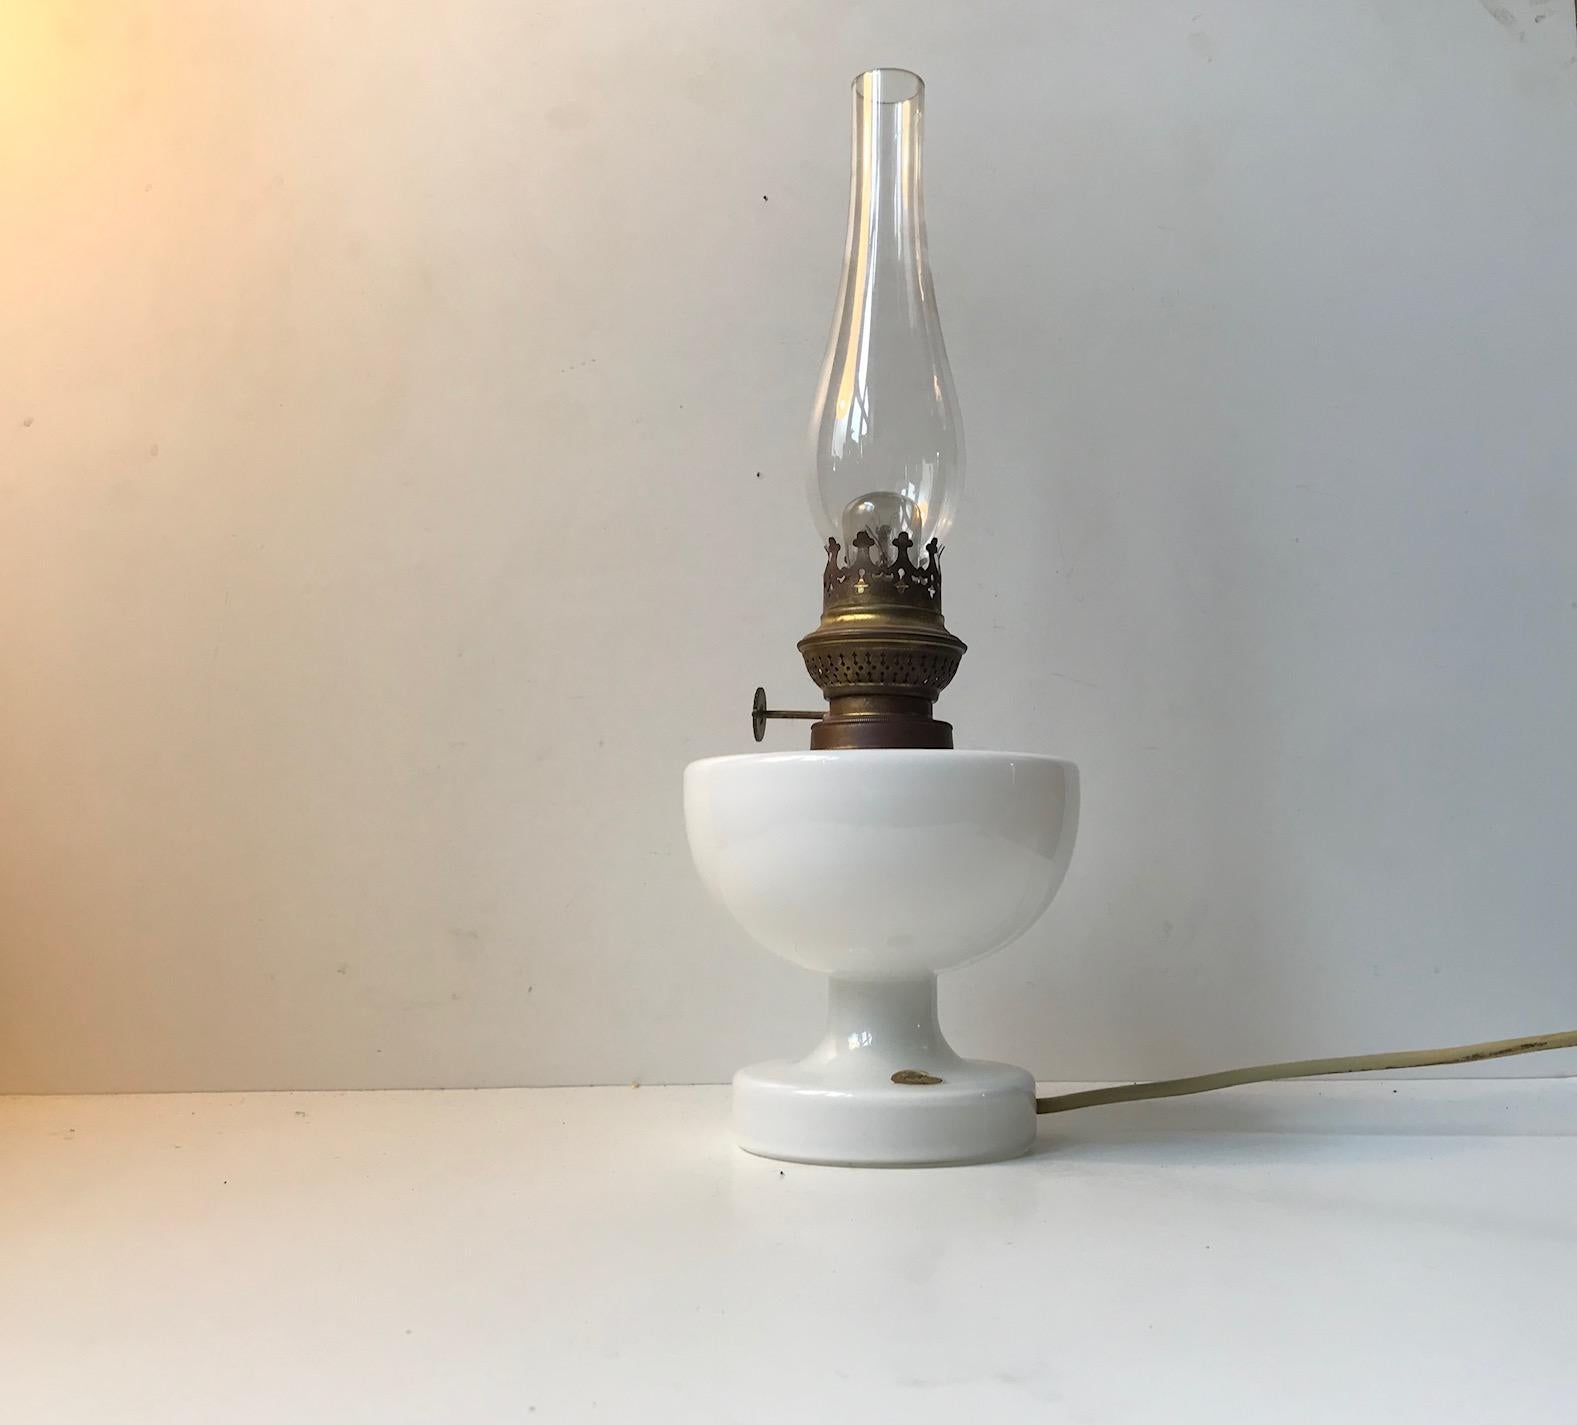 - Converted oil lamp called Victoria
- Its was designed by Michael E. Bang 
- Manufactured by Holmegaard in Denmark during the 1960s
- Old paper sticker from Holmegaard-Kastrup still present.